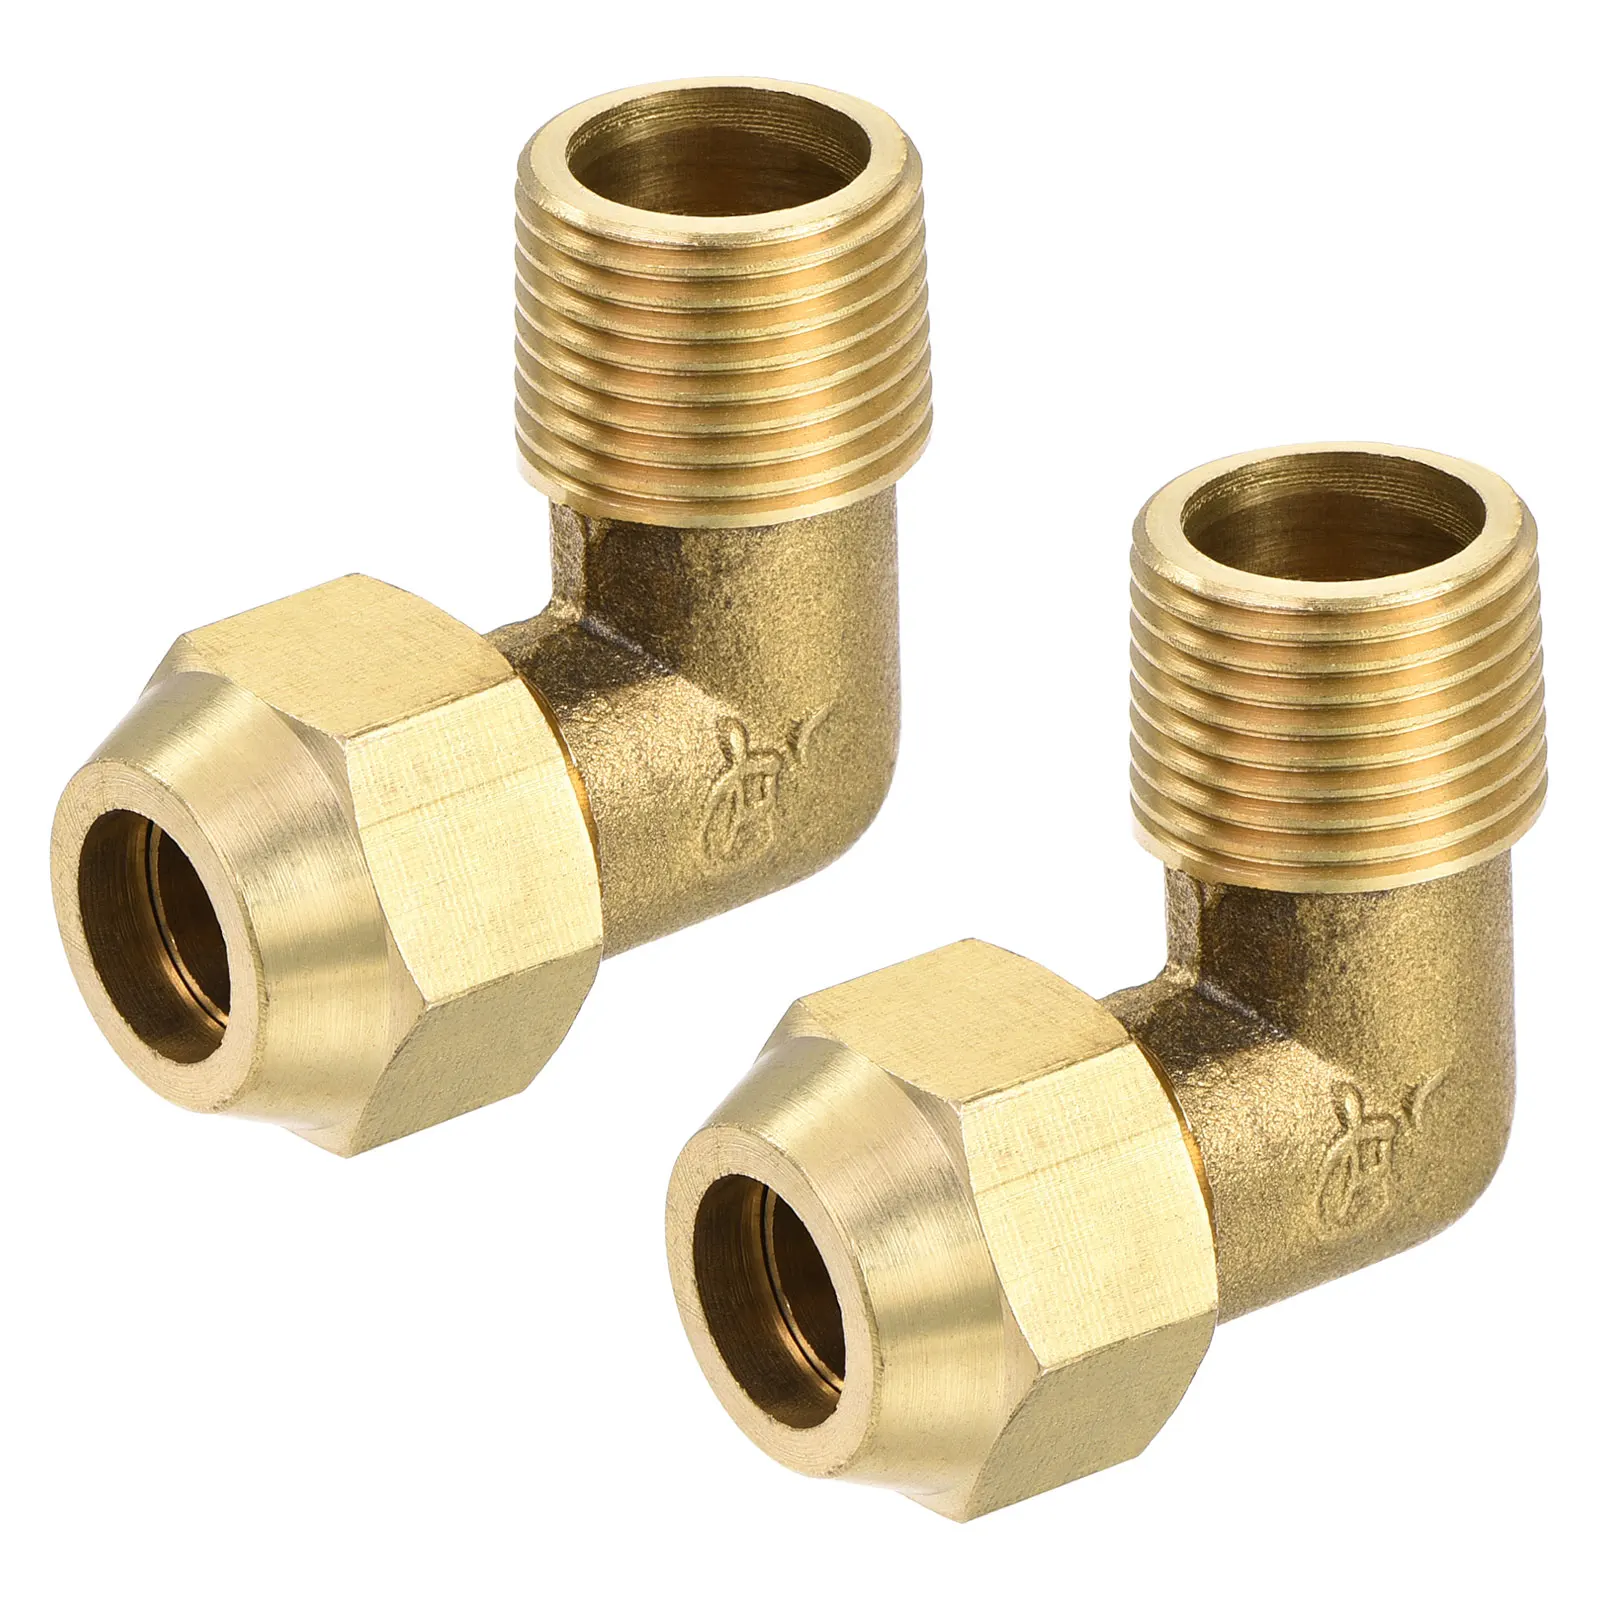 

Uxcell Brass Compression Tube Fitting 10mm Tube OD to 3/8PT Male Thread Elbow Fittings Pack of 2